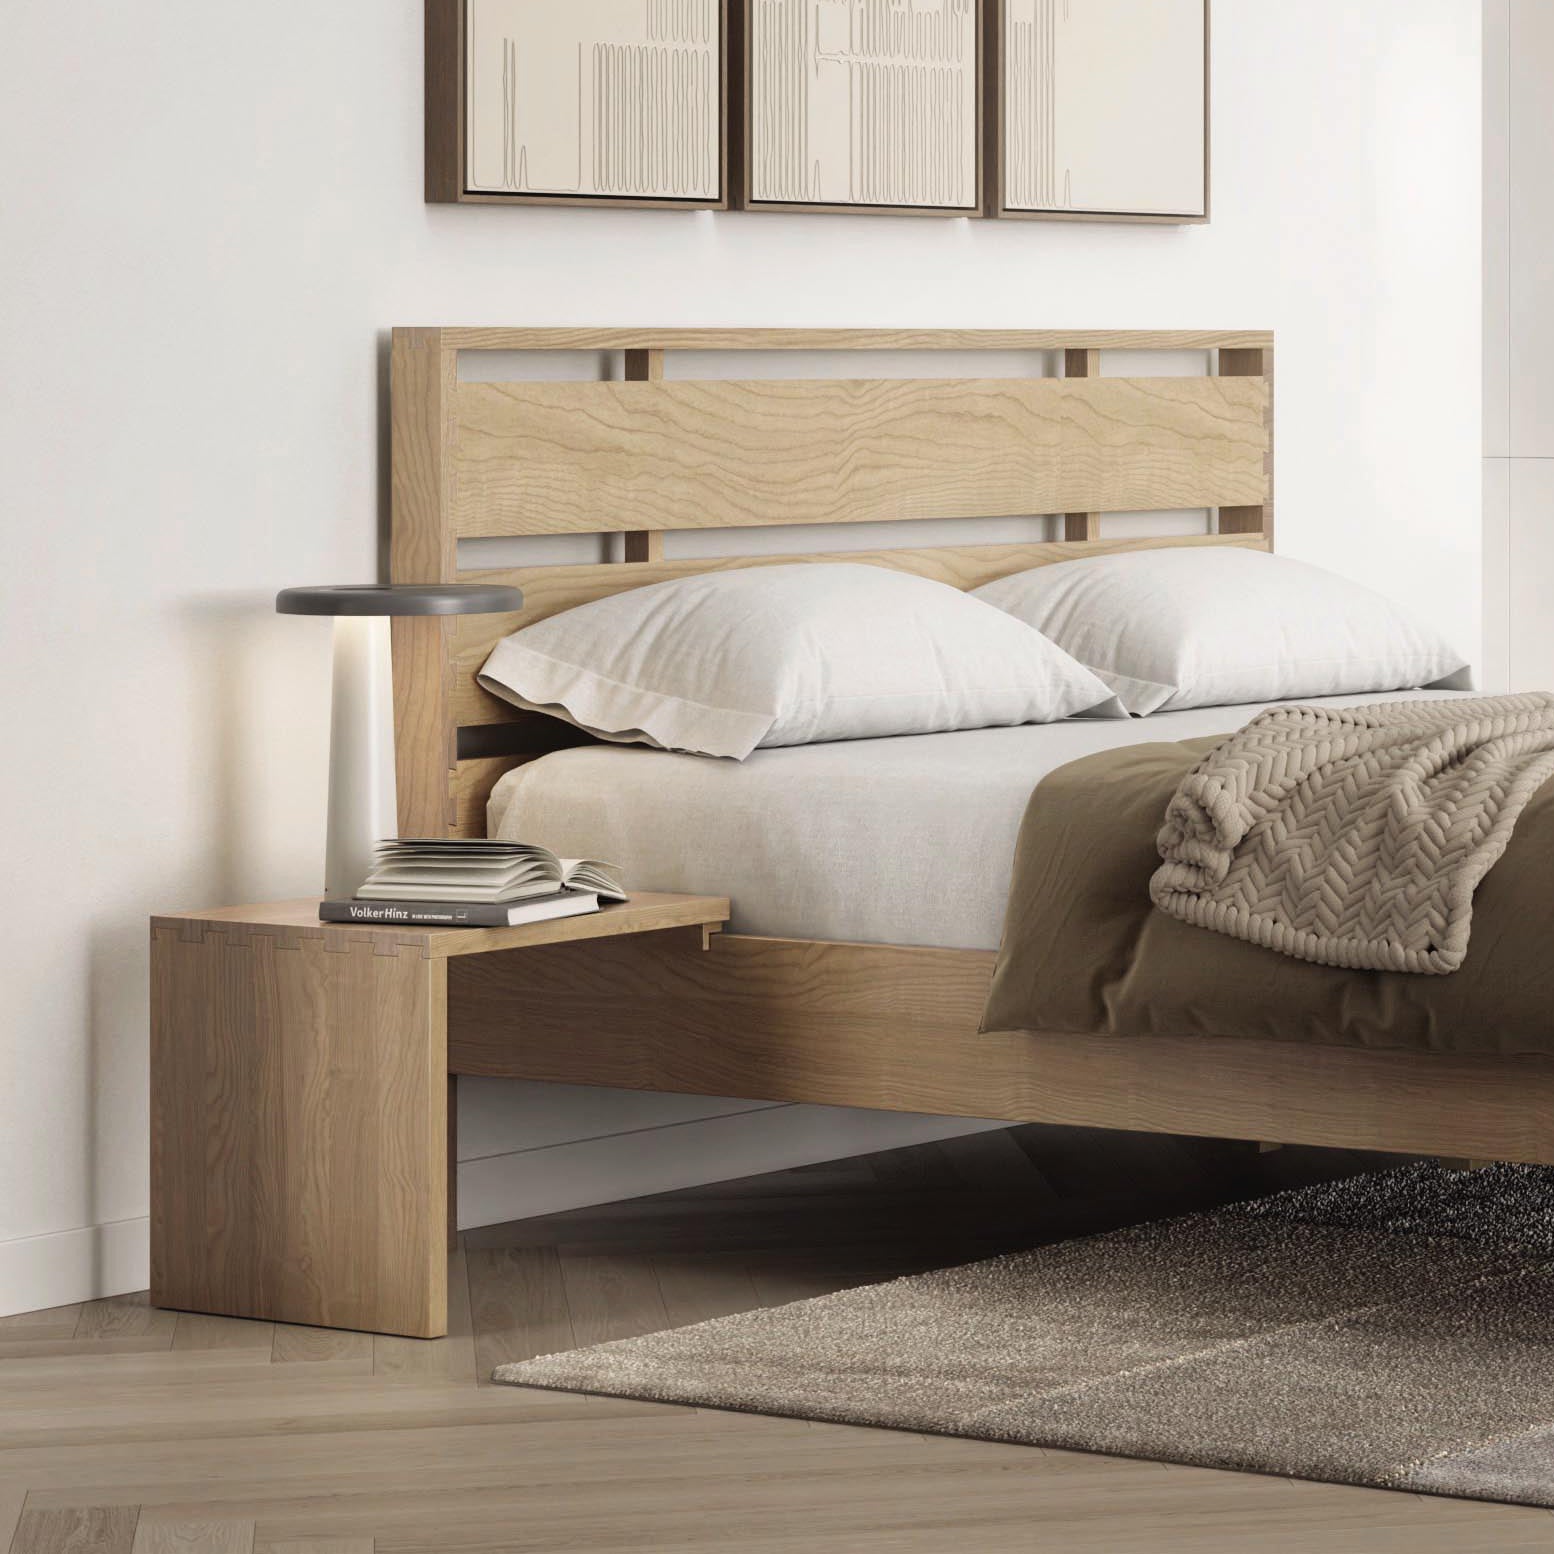 A modern bedroom featuring a solid oak hardwood bed frame with a headboard, crisp white bedding, and a Copeland Furniture Oslo Attached Nightstand with books and a cylindrical lamp on it. A textured